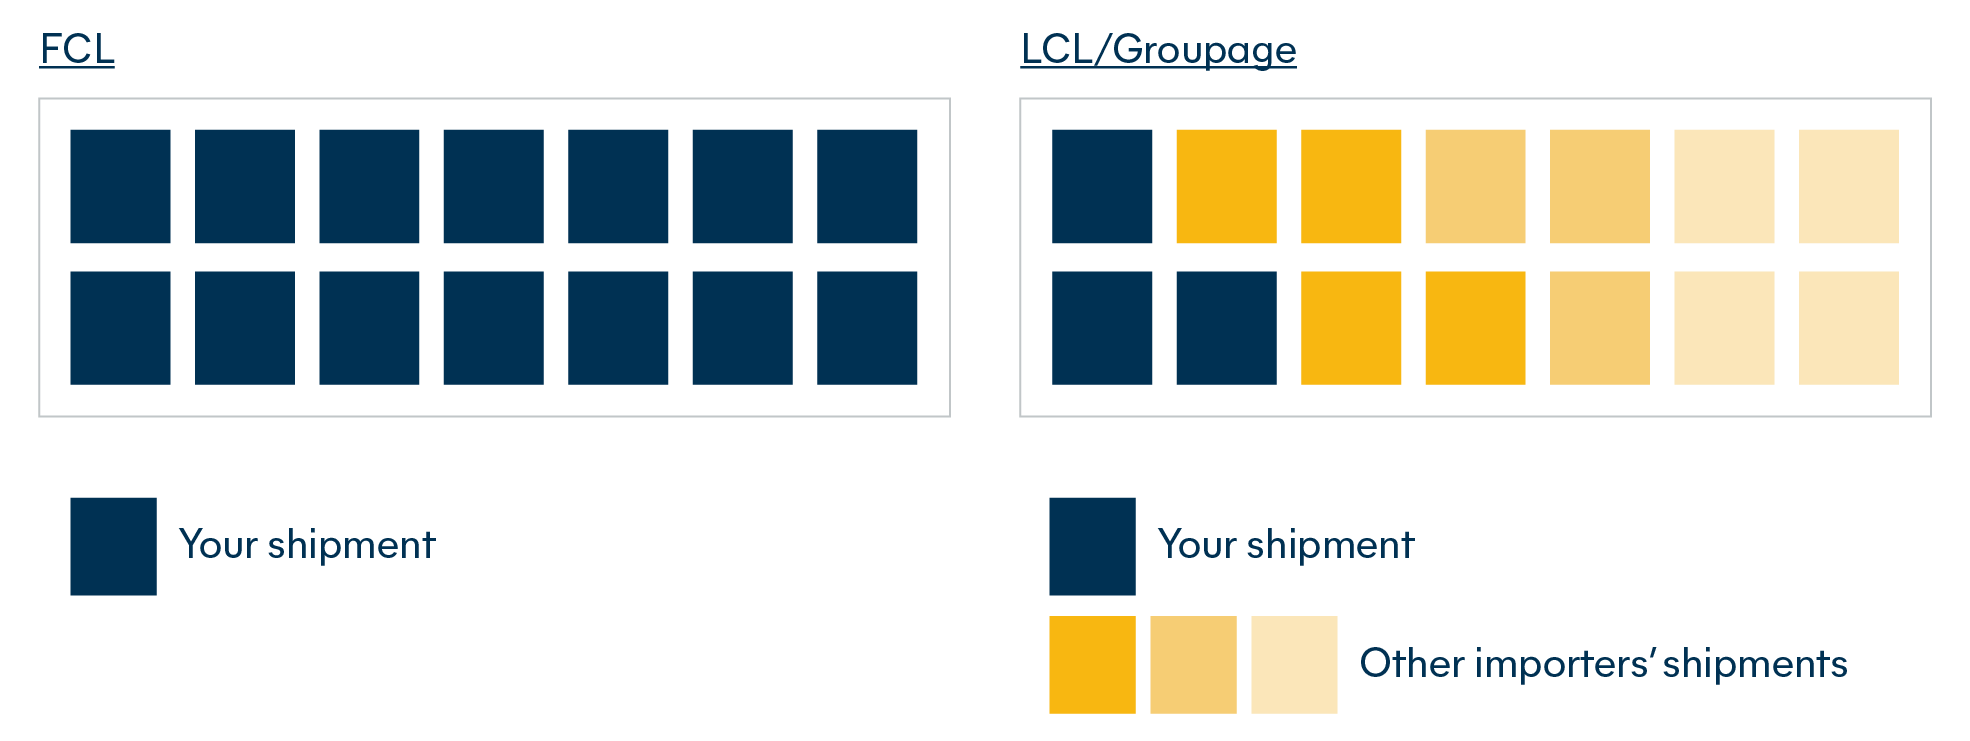 lcl container vs. fcl container